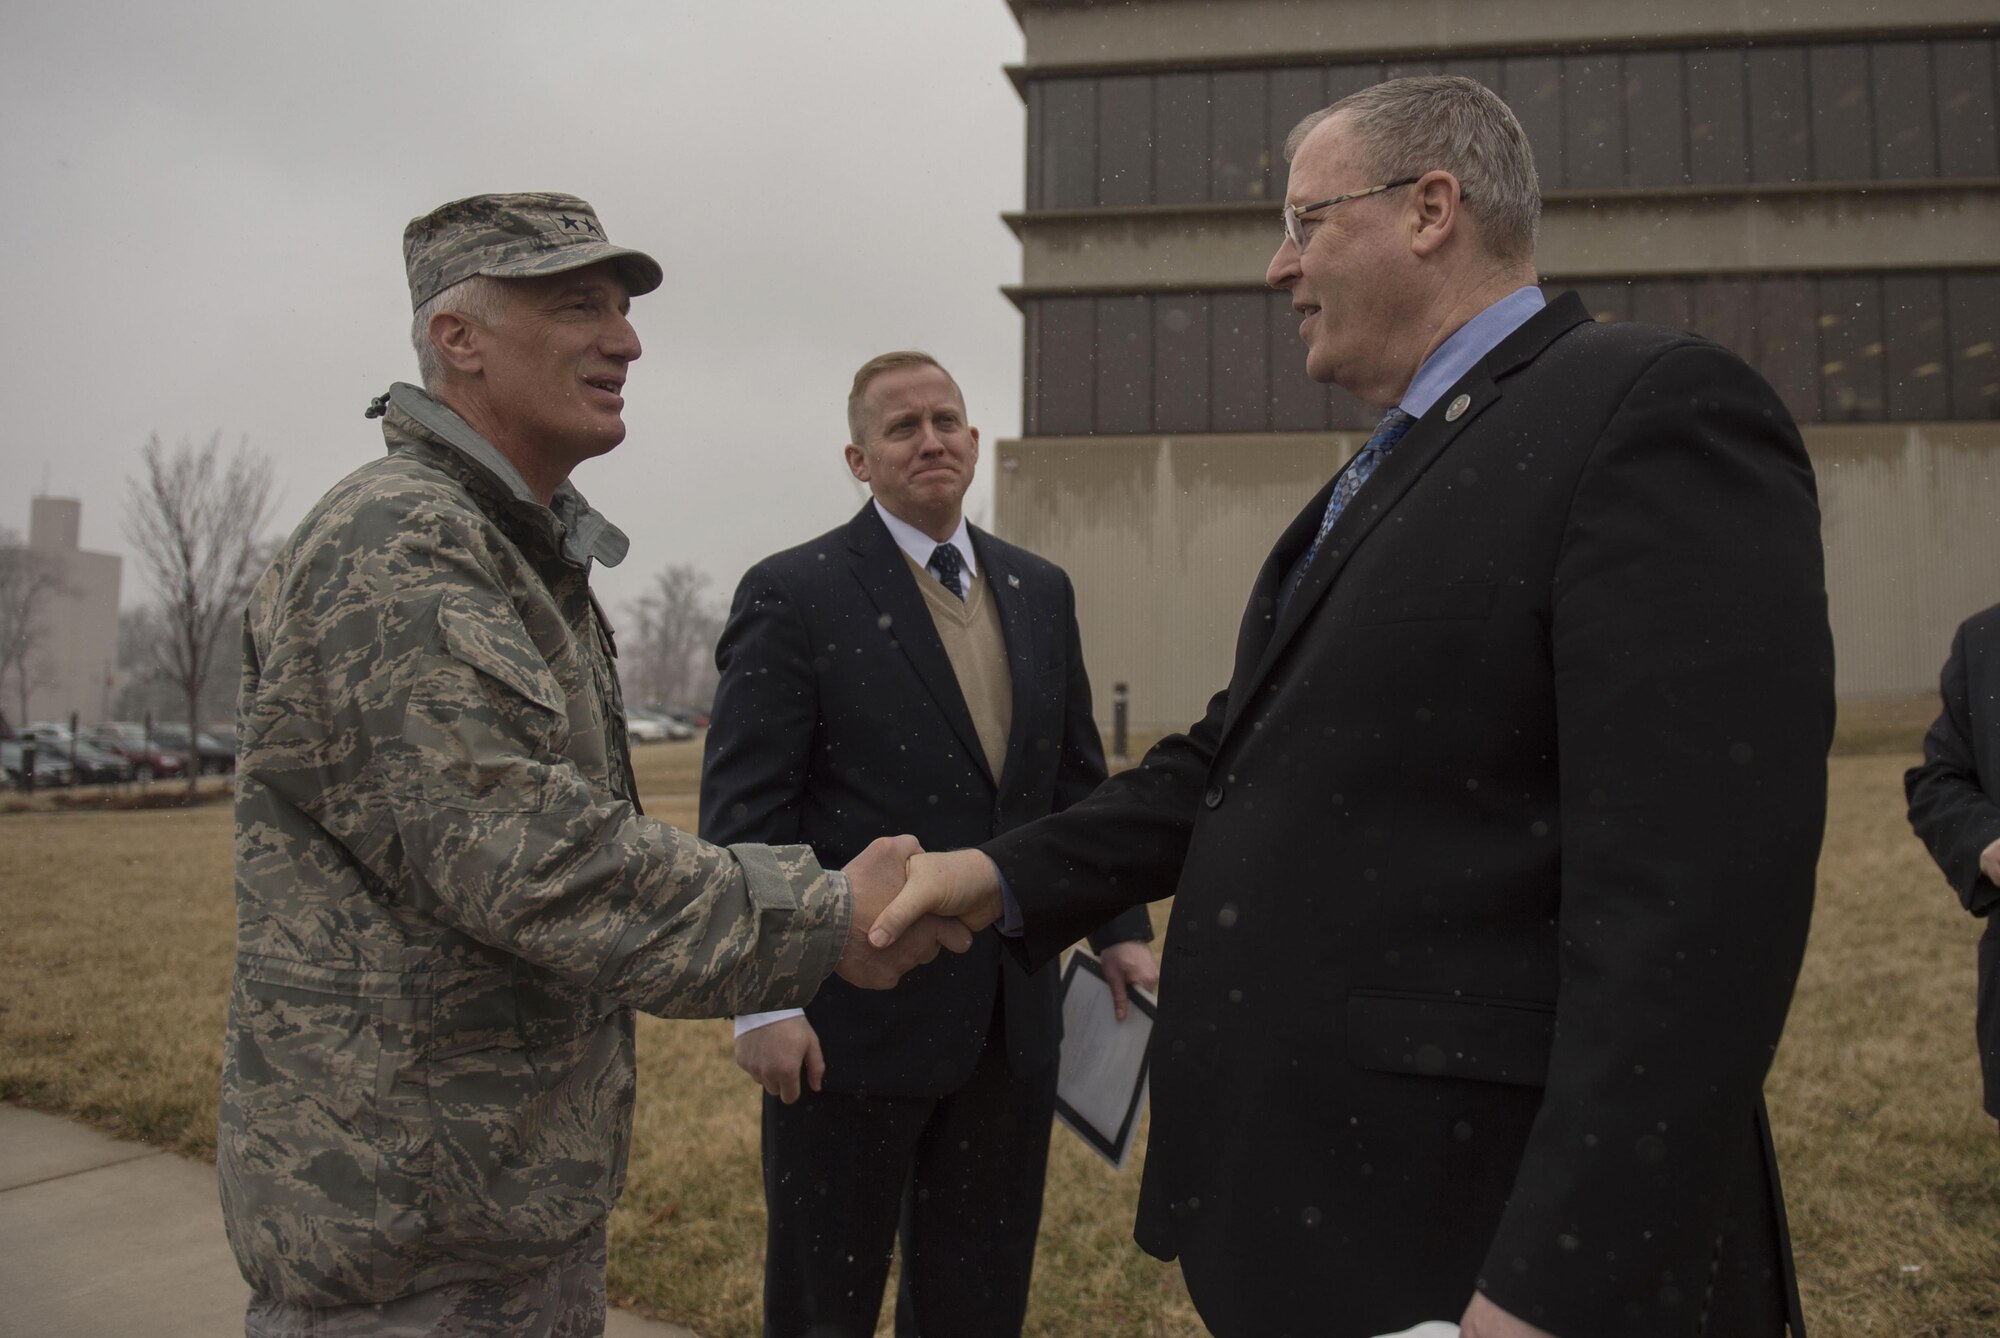 Deputy Defense Secretary Bob Work, right, says goodbye to Air Force Maj. Gen. Thomas J. Tom Masiello, commander, Air Force Research Laboratory as he prepares to depart Wright-Patterson Air Force Base, Ohio, after touring the base and speaking to a group of students from the local Dayton, Ohio, area during a 'Week at the Labs event March 3, 2016. (DoD photo/Air Force Senior Master Sgt. Adrian Cadiz.)